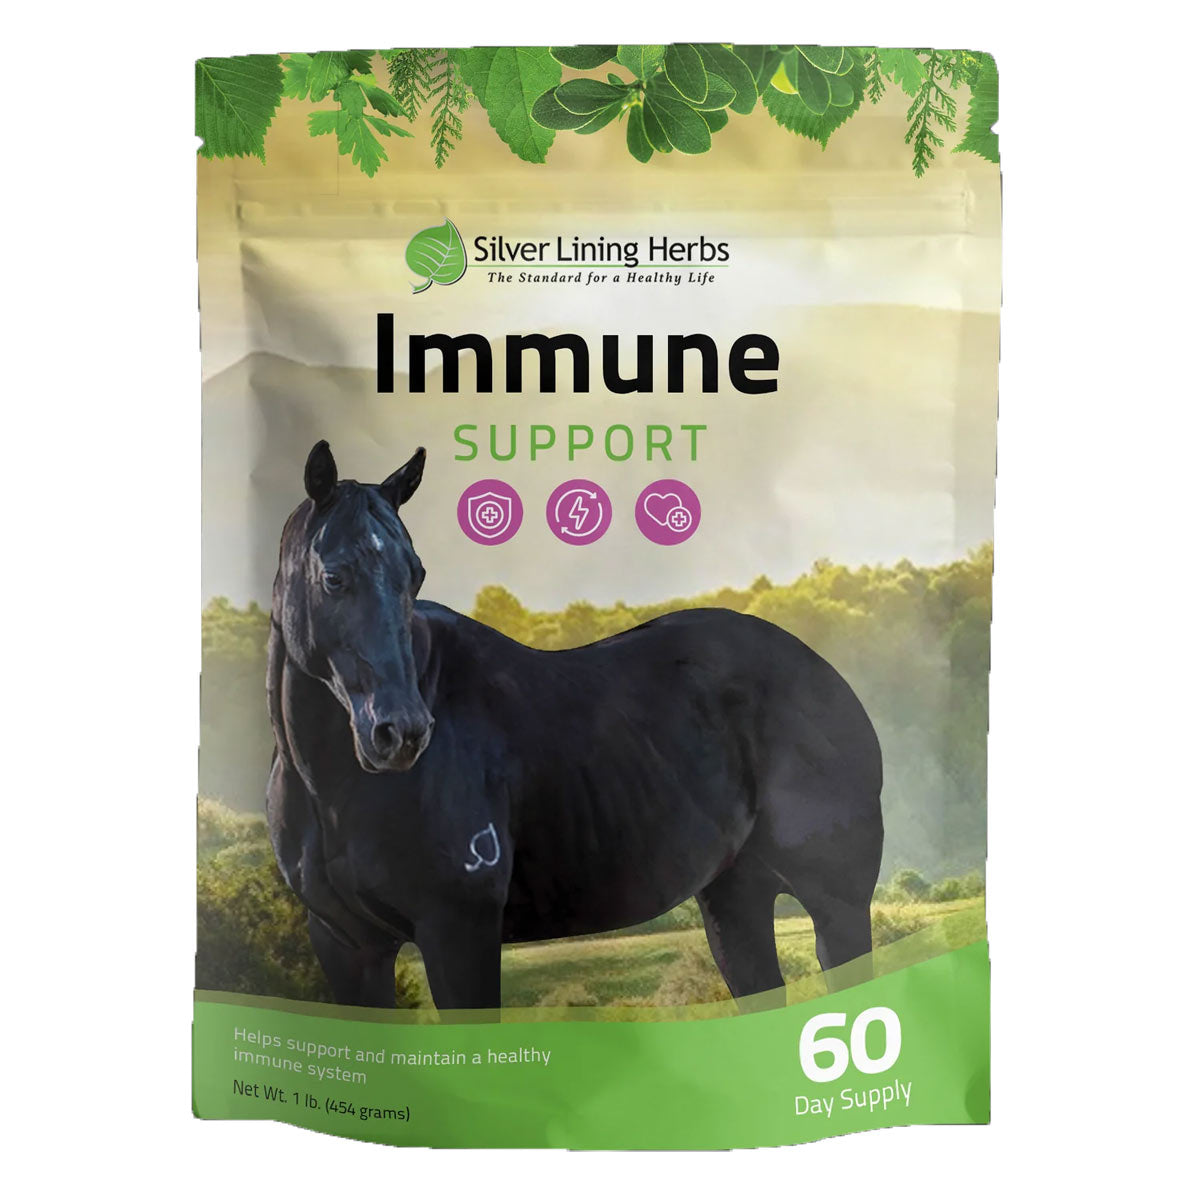 Silver Lining Herbs Immune Support - 1lb Bag